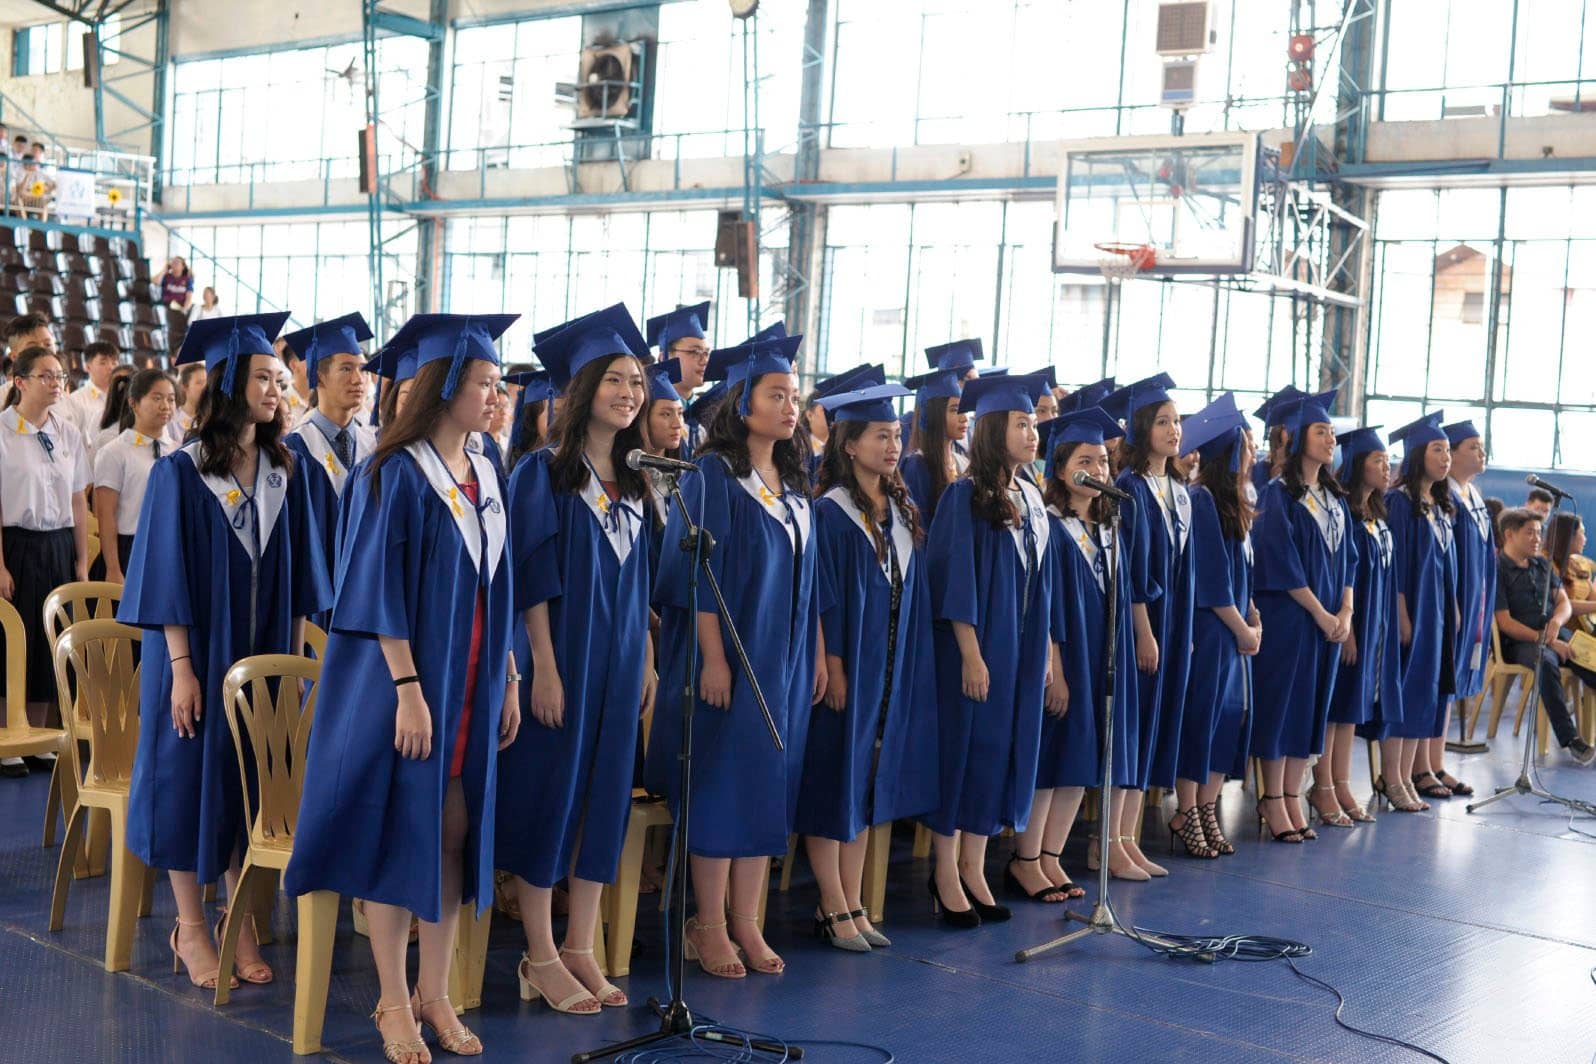 Commencement and Moving Up Ceremonies for Elementary, Junior High, and Senior High